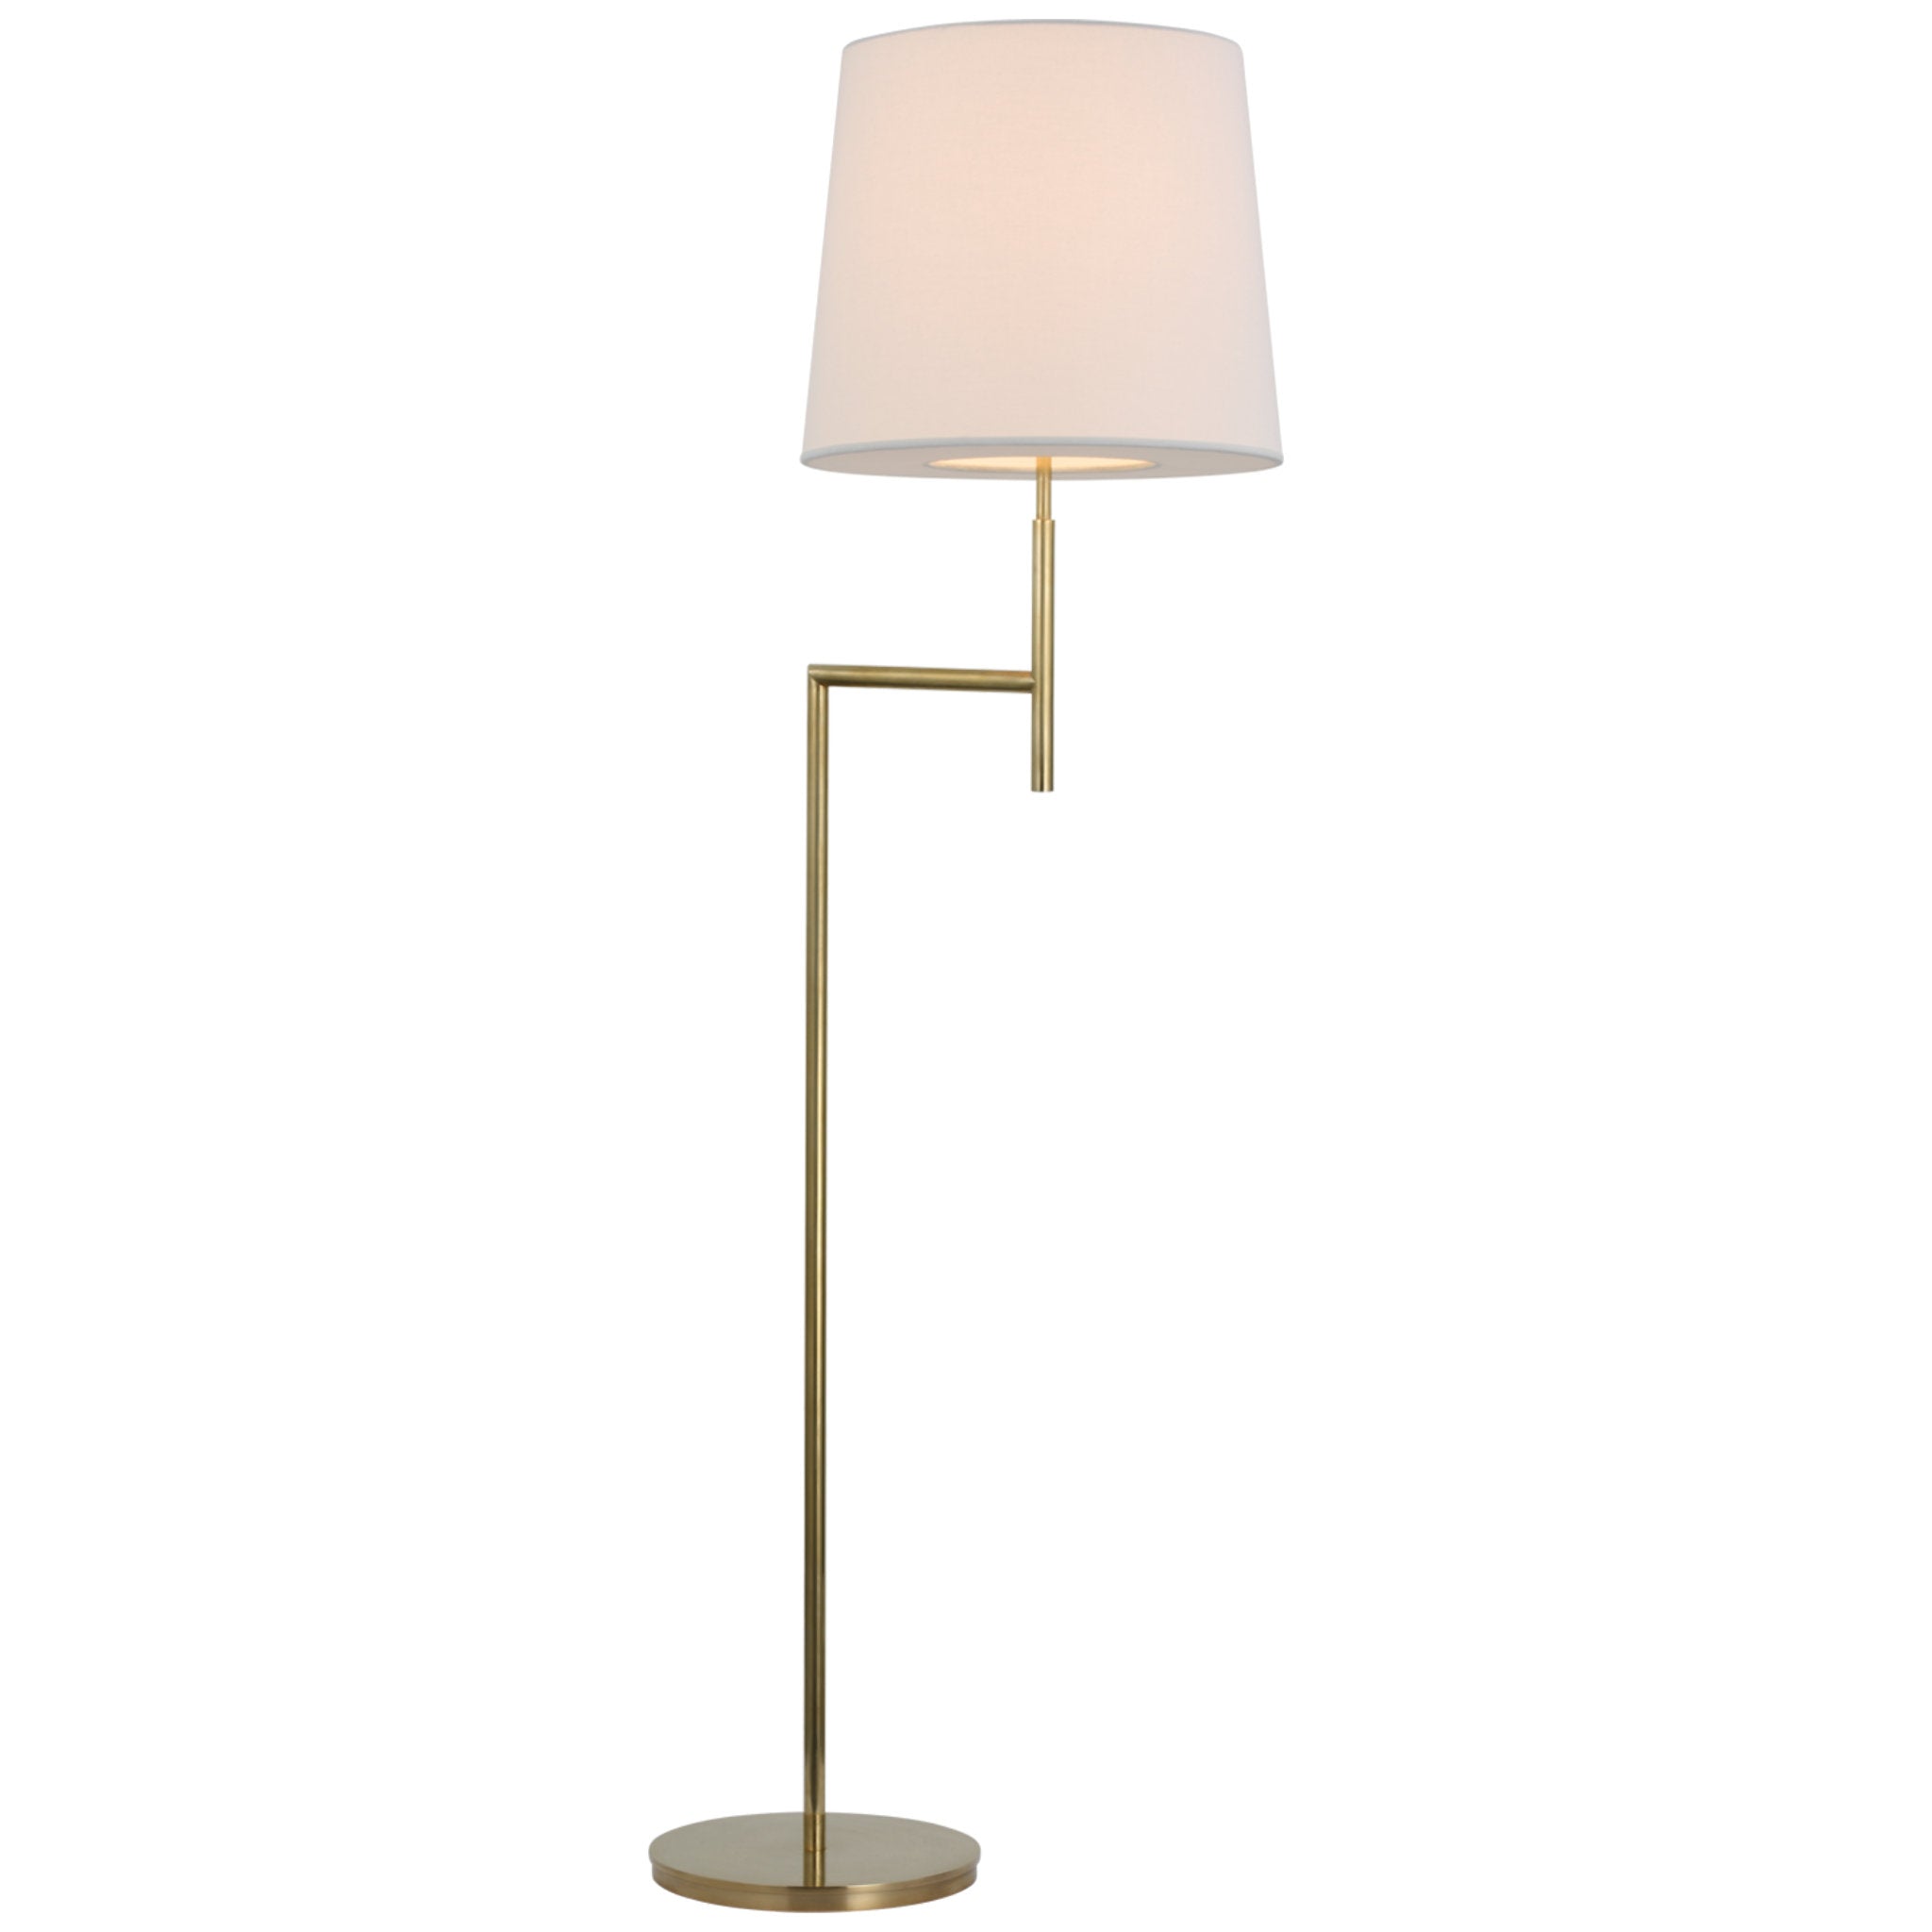 Barbara Barry Clarion Bridge Arm Floor Lamp in Soft Brass with Linen Shade